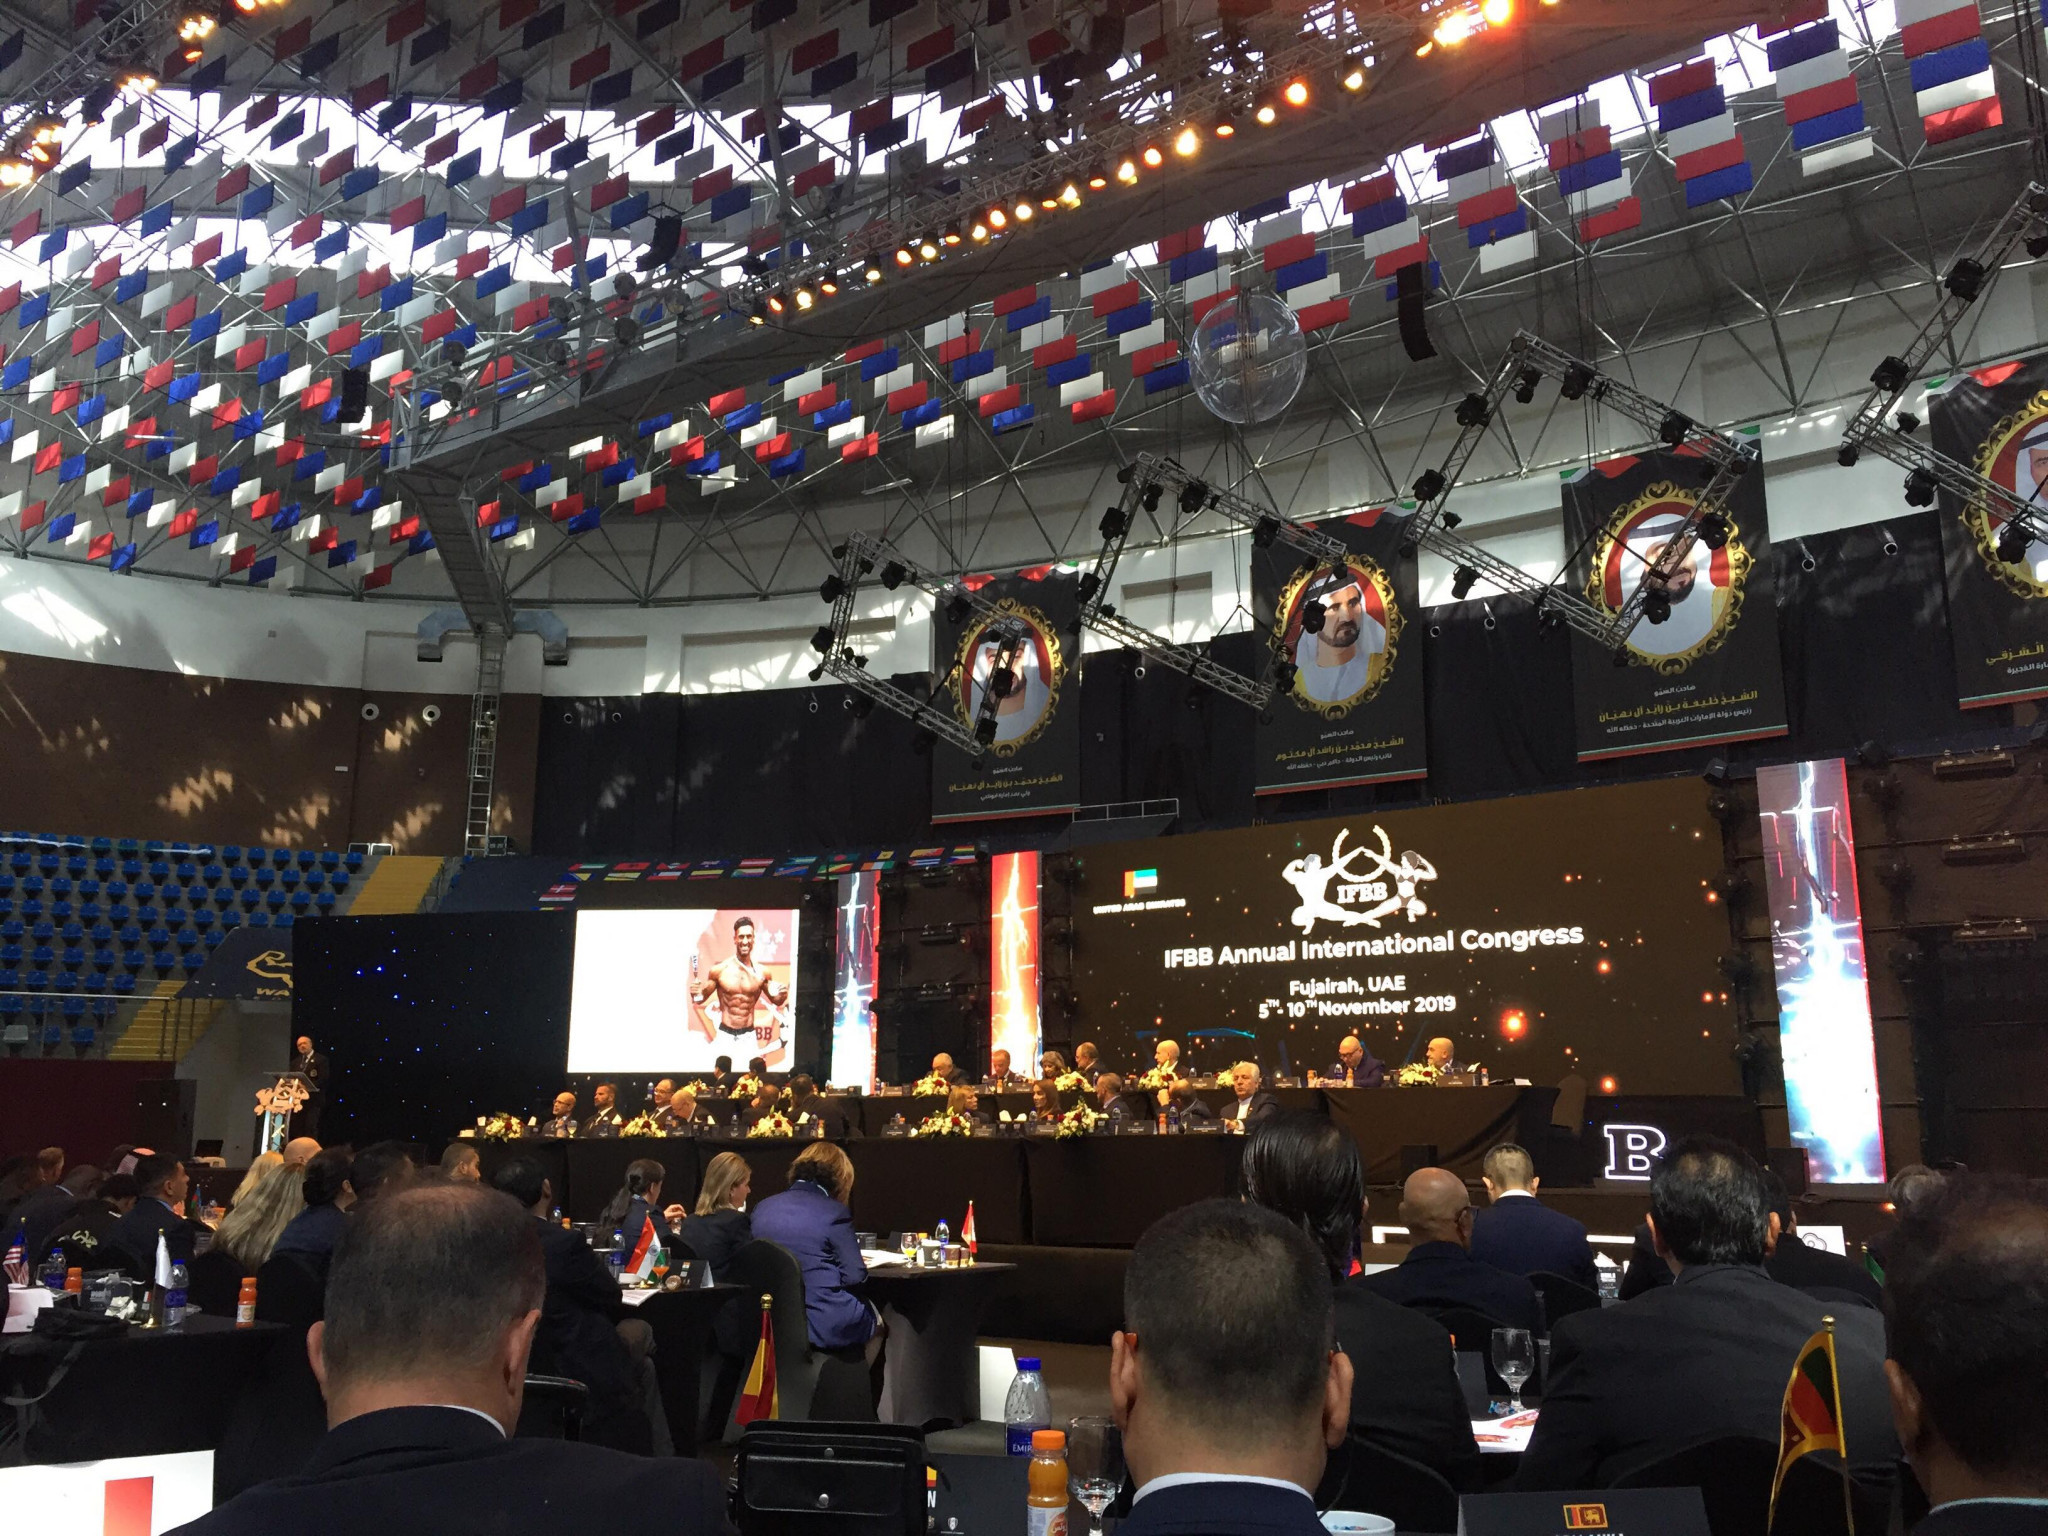 World Power Games confirmed at IFBB World Congress